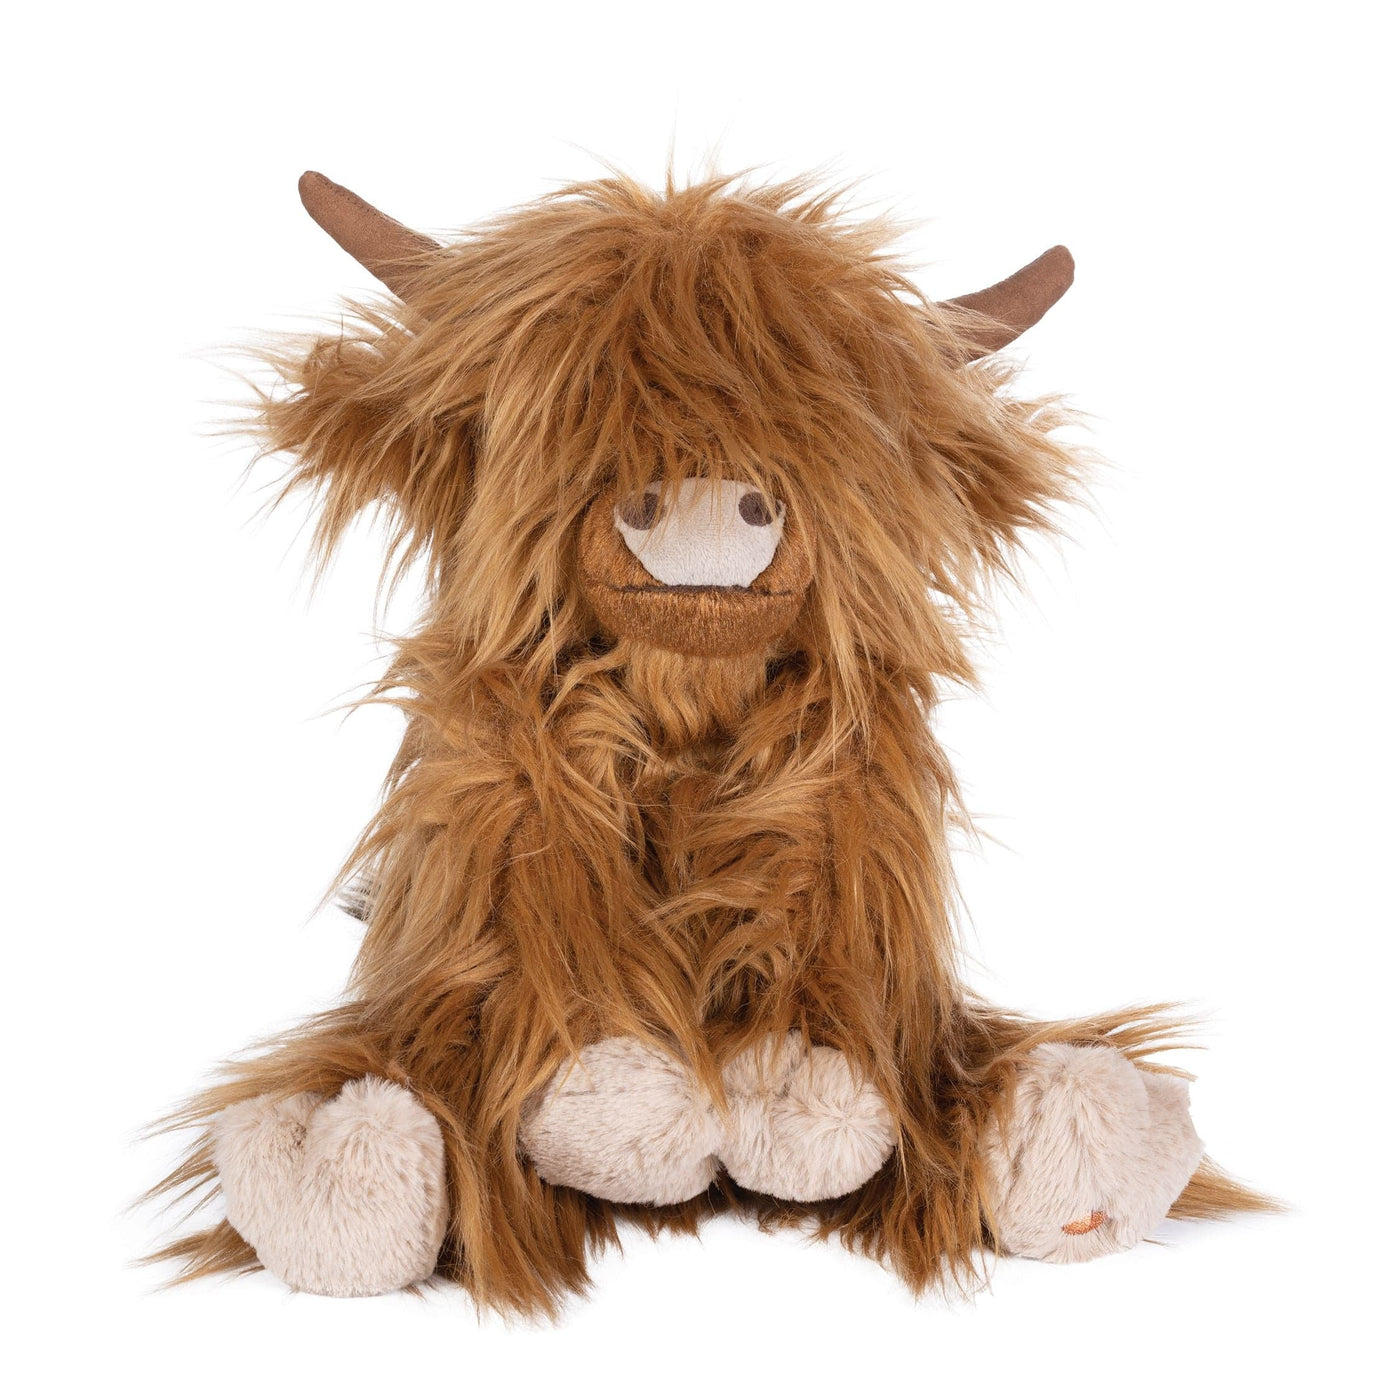 Wrendale Designs Childrens Toys and Games 'Gordon' Highland Cow Junior Plush Character - Choice Of Design